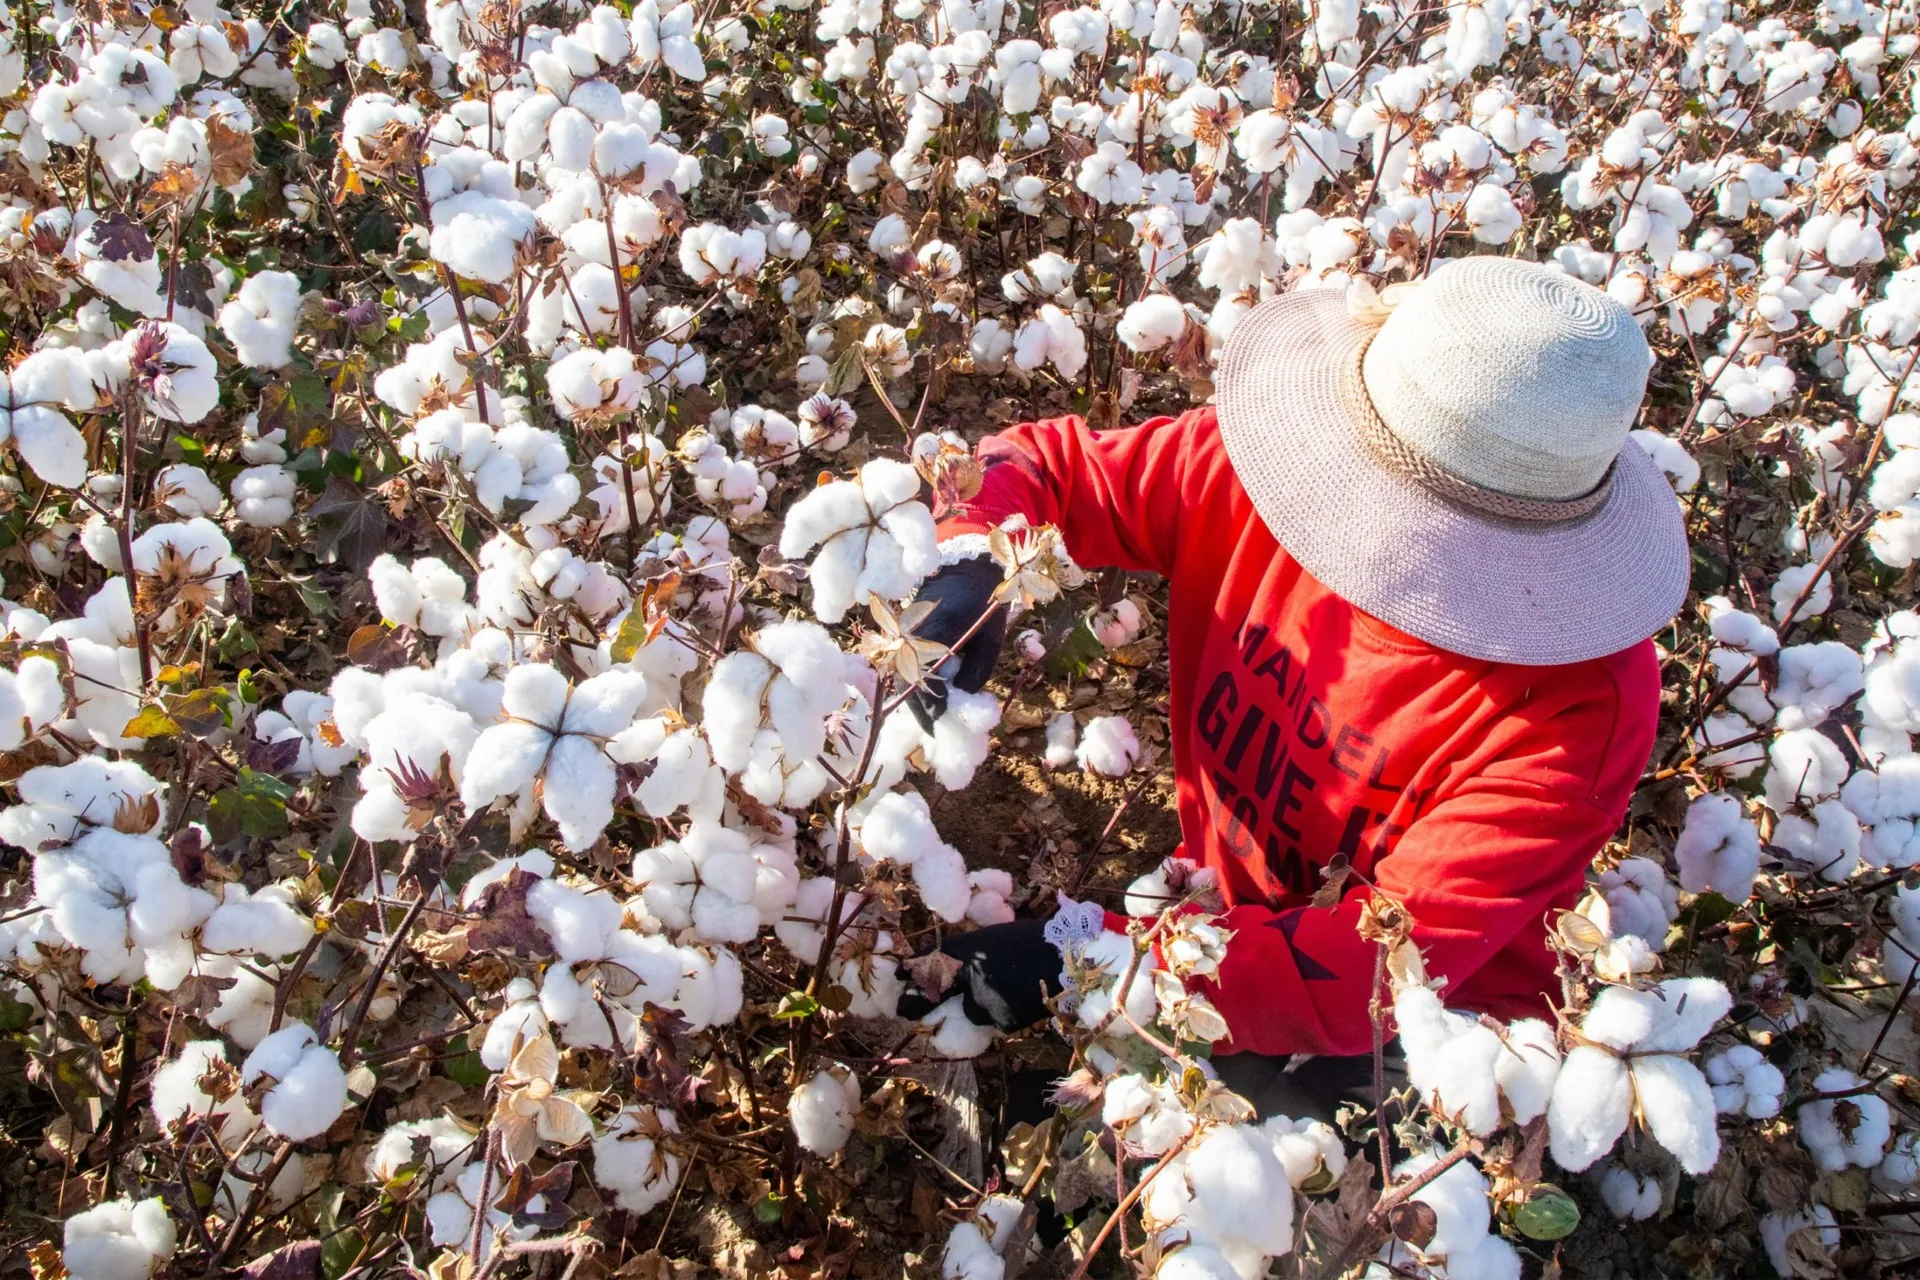 Coercive Labor in Xinjiang: Labor Transfer and the Mobilization of Ethnic Minorities to Pick Cotton